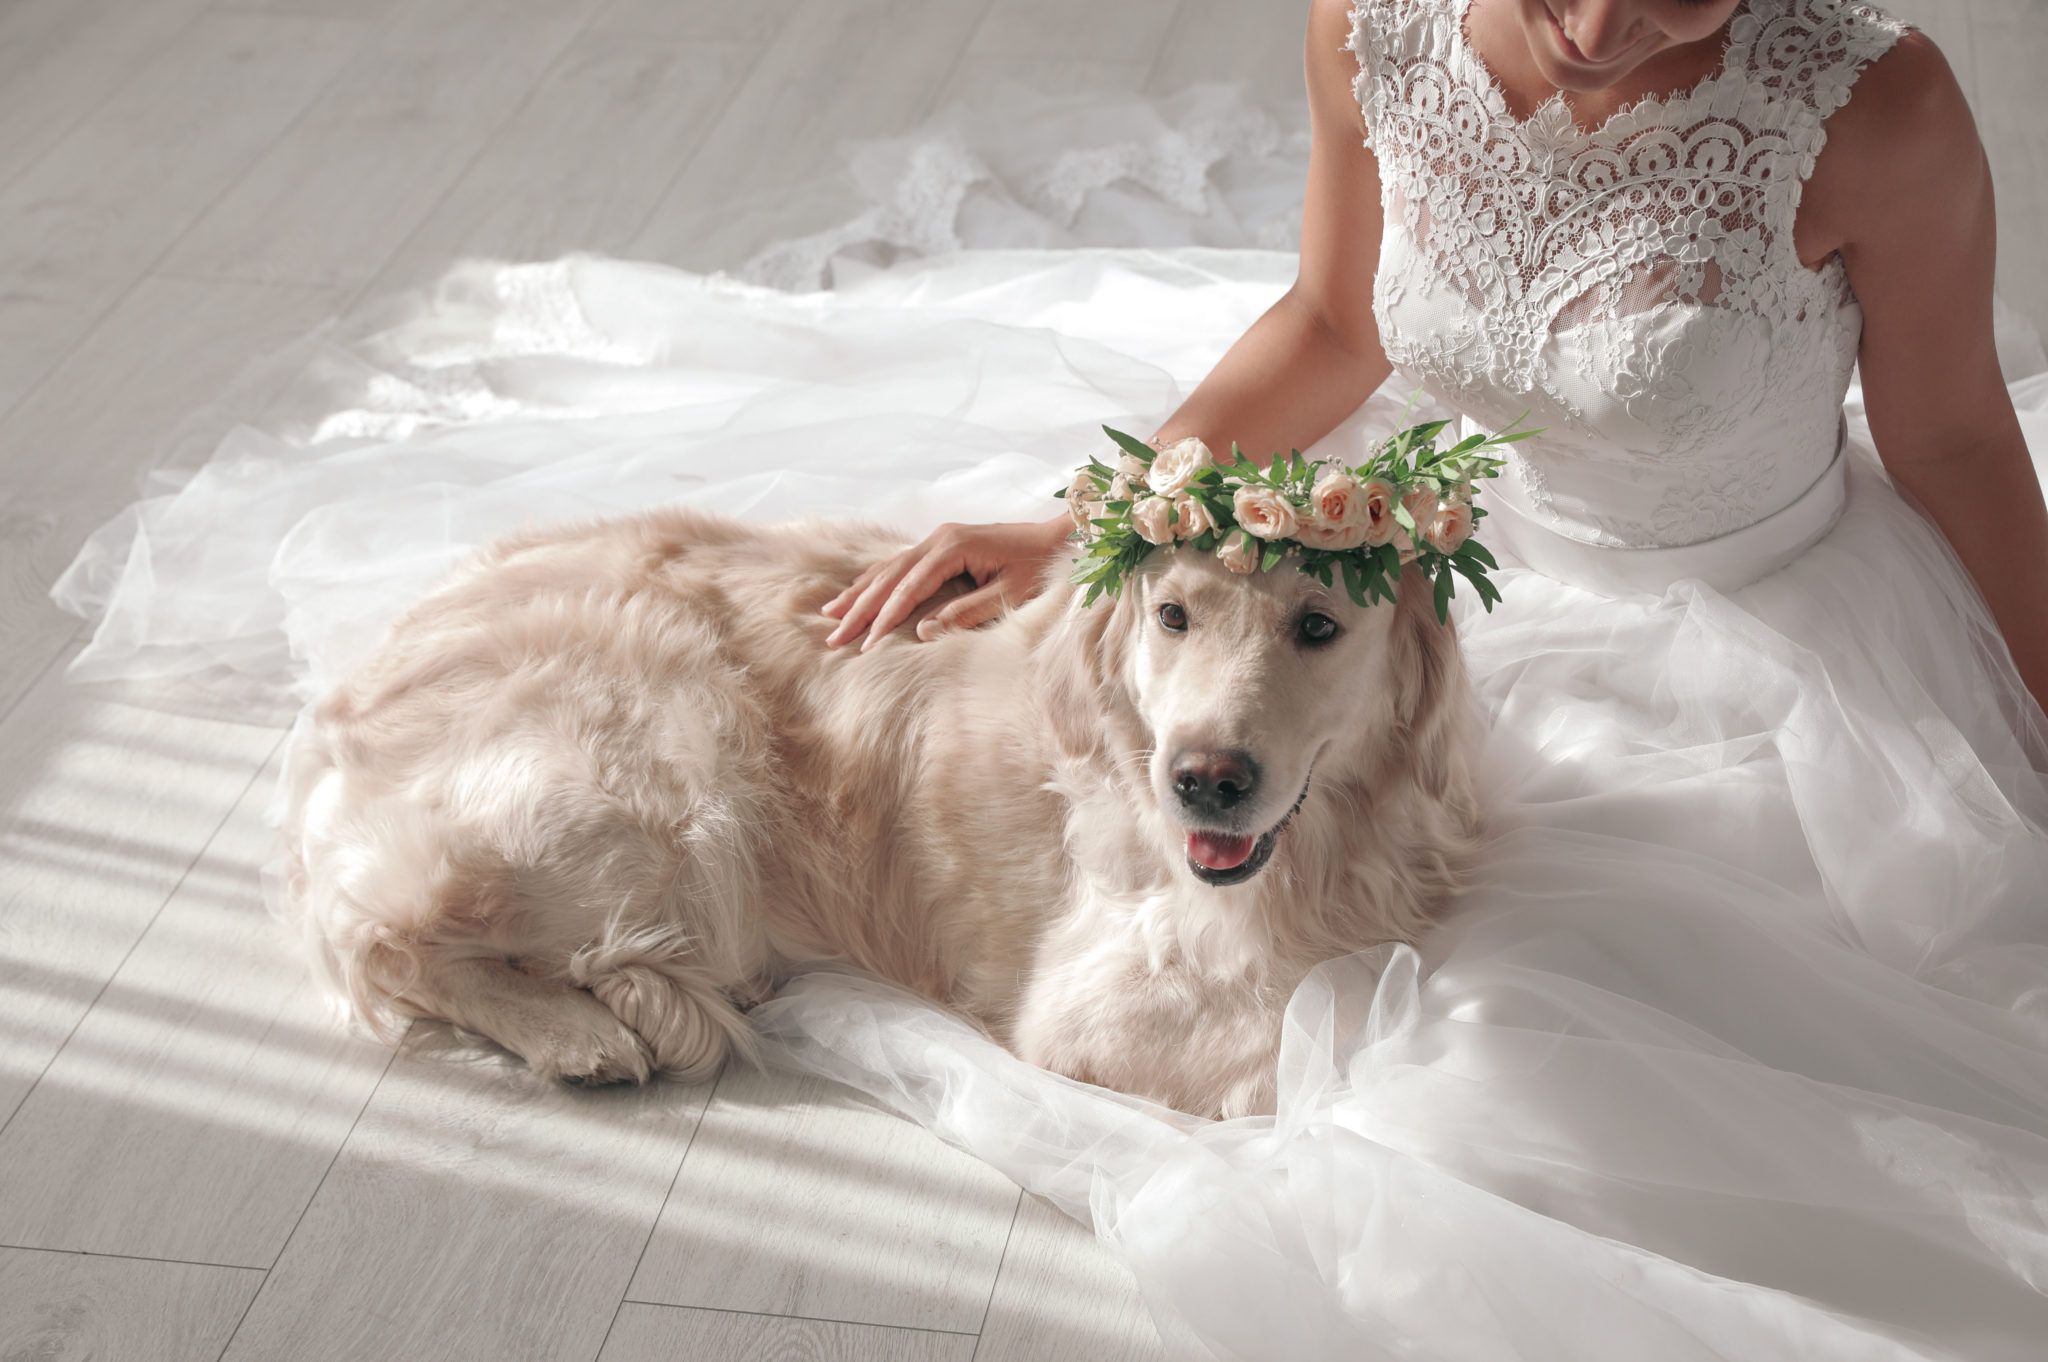 woman in a wedding dress sitting with a golden retriever dog wearing a flower crown